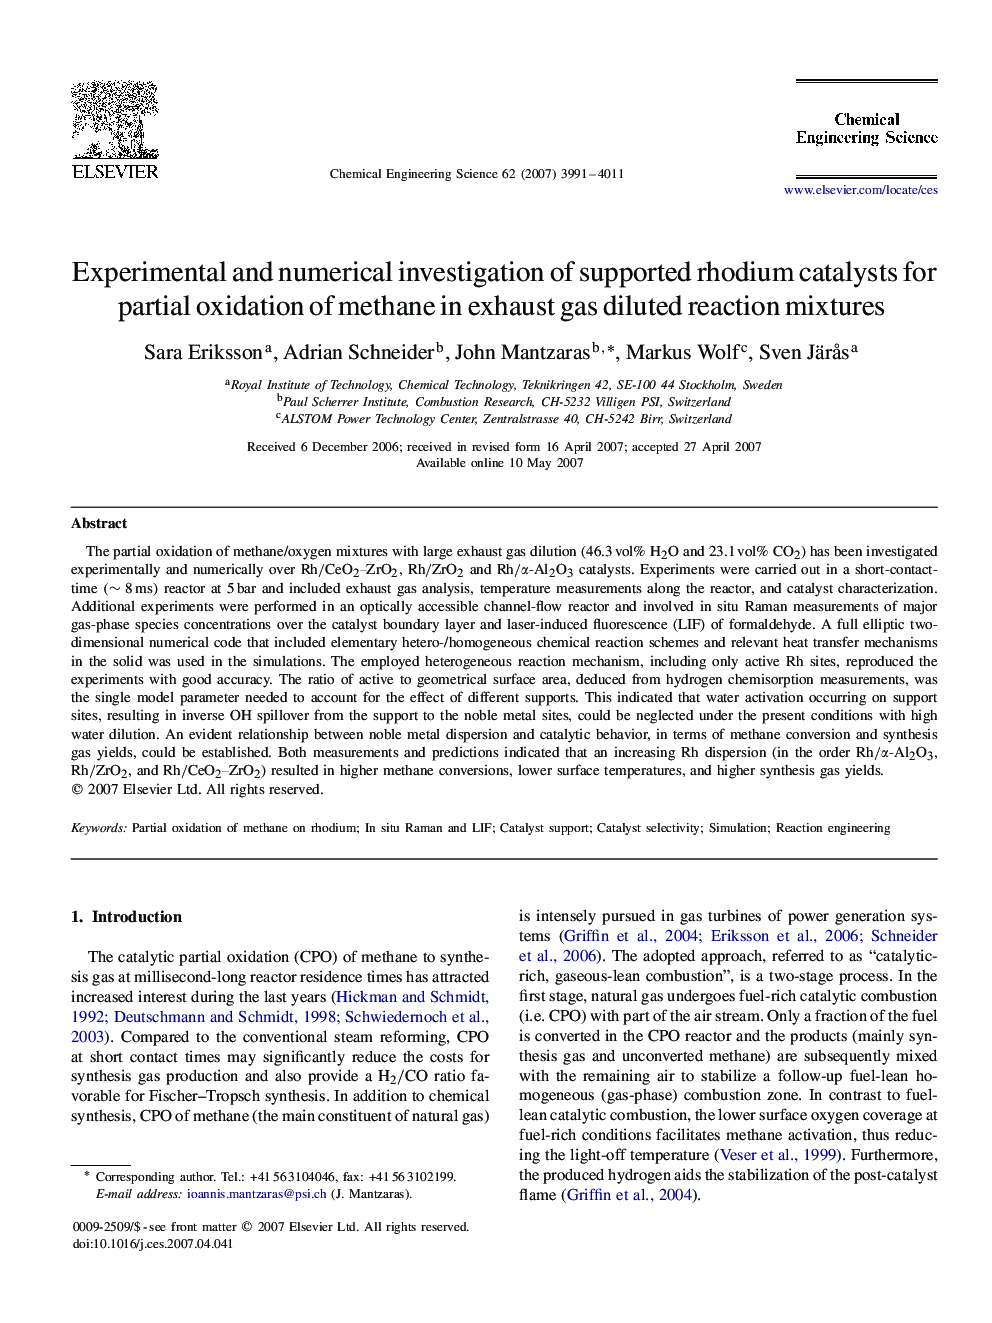 Experimental and numerical investigation of supported rhodium catalysts for partial oxidation of methane in exhaust gas diluted reaction mixtures